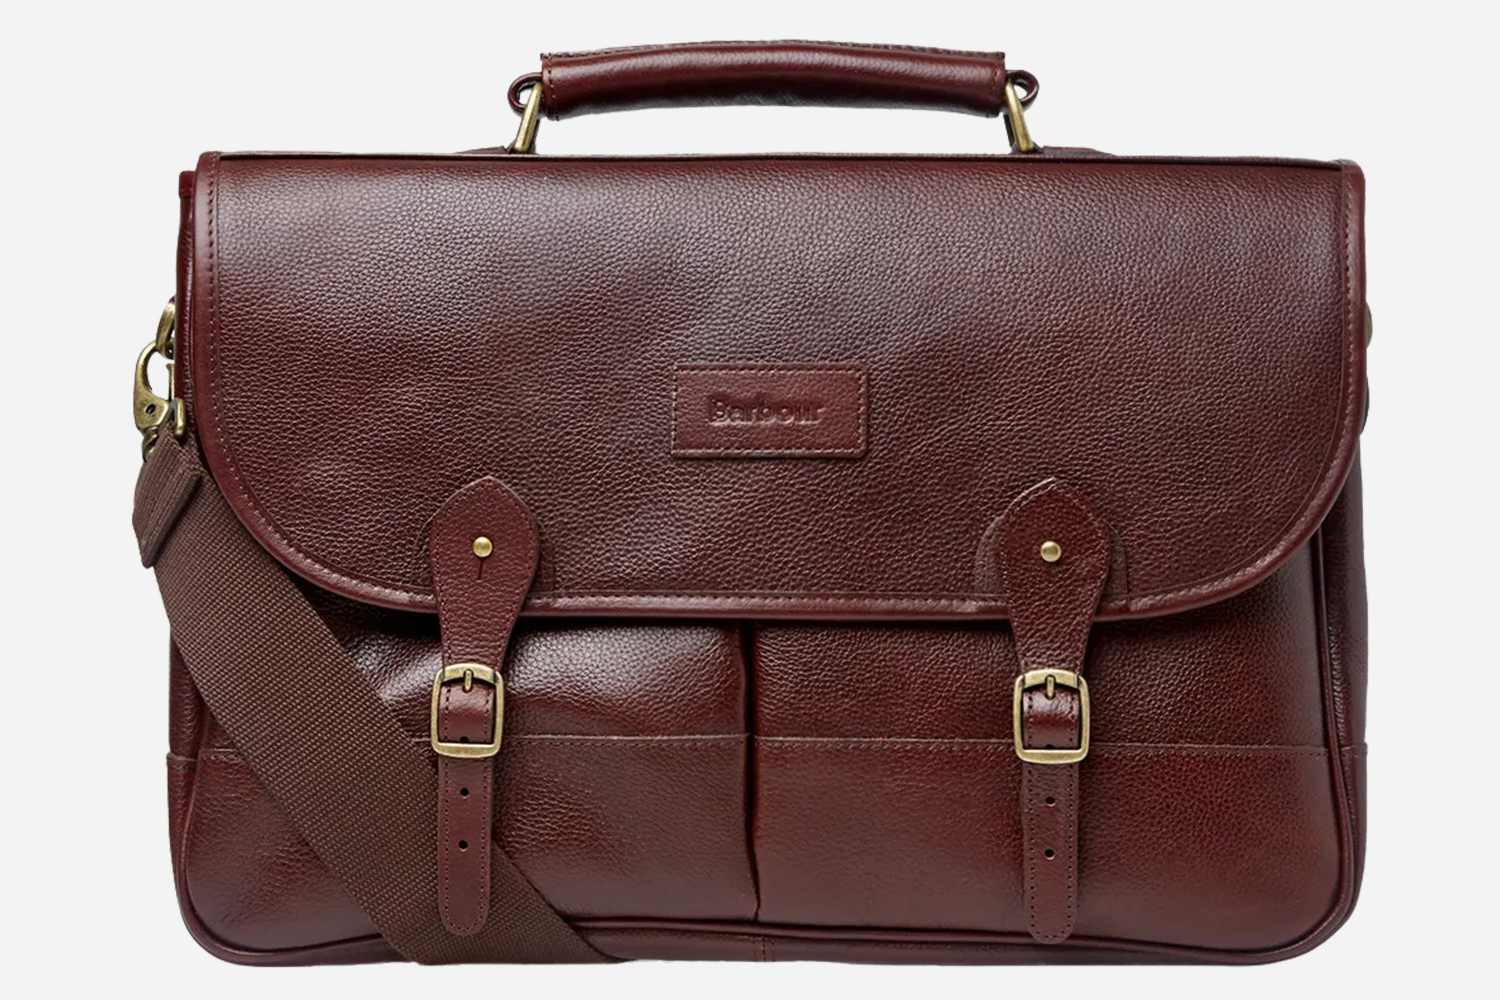 Barbour Briefcases Sale at End Clothing